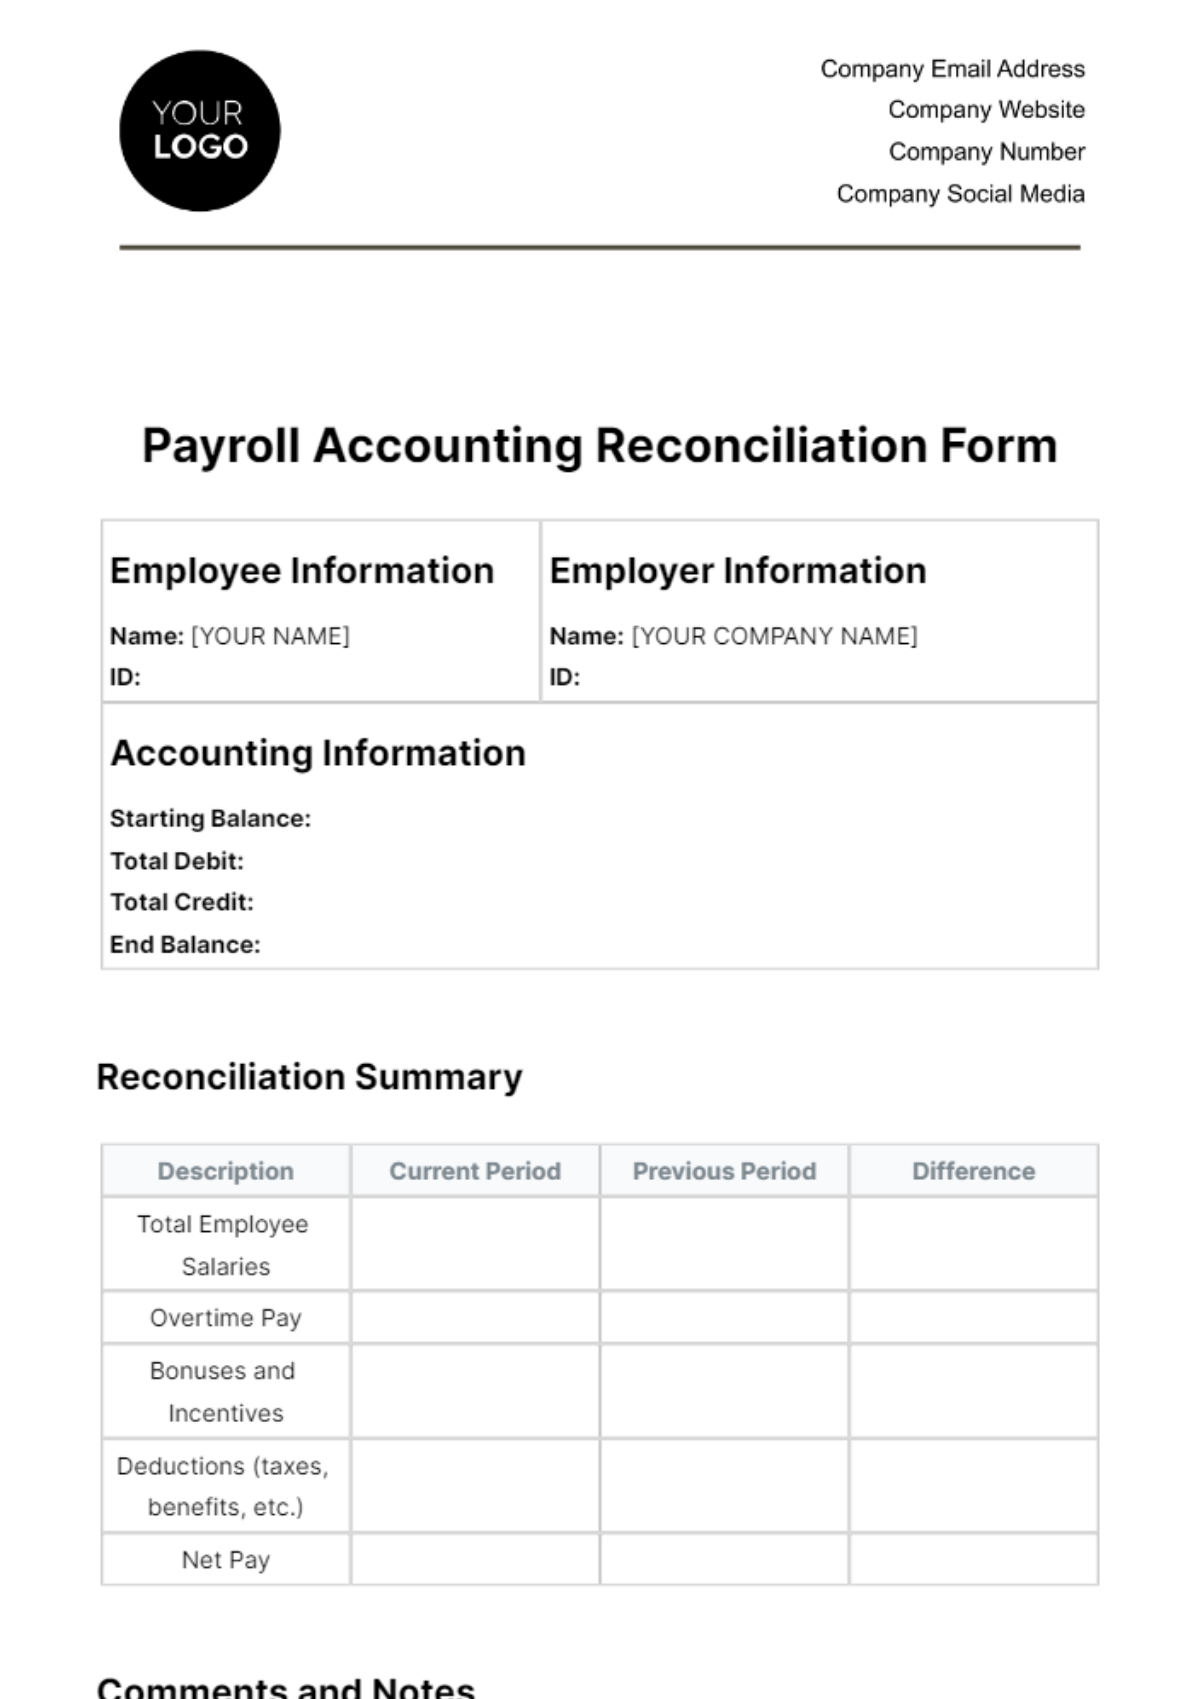 Free Payroll Accounting Reconciliation Form Template